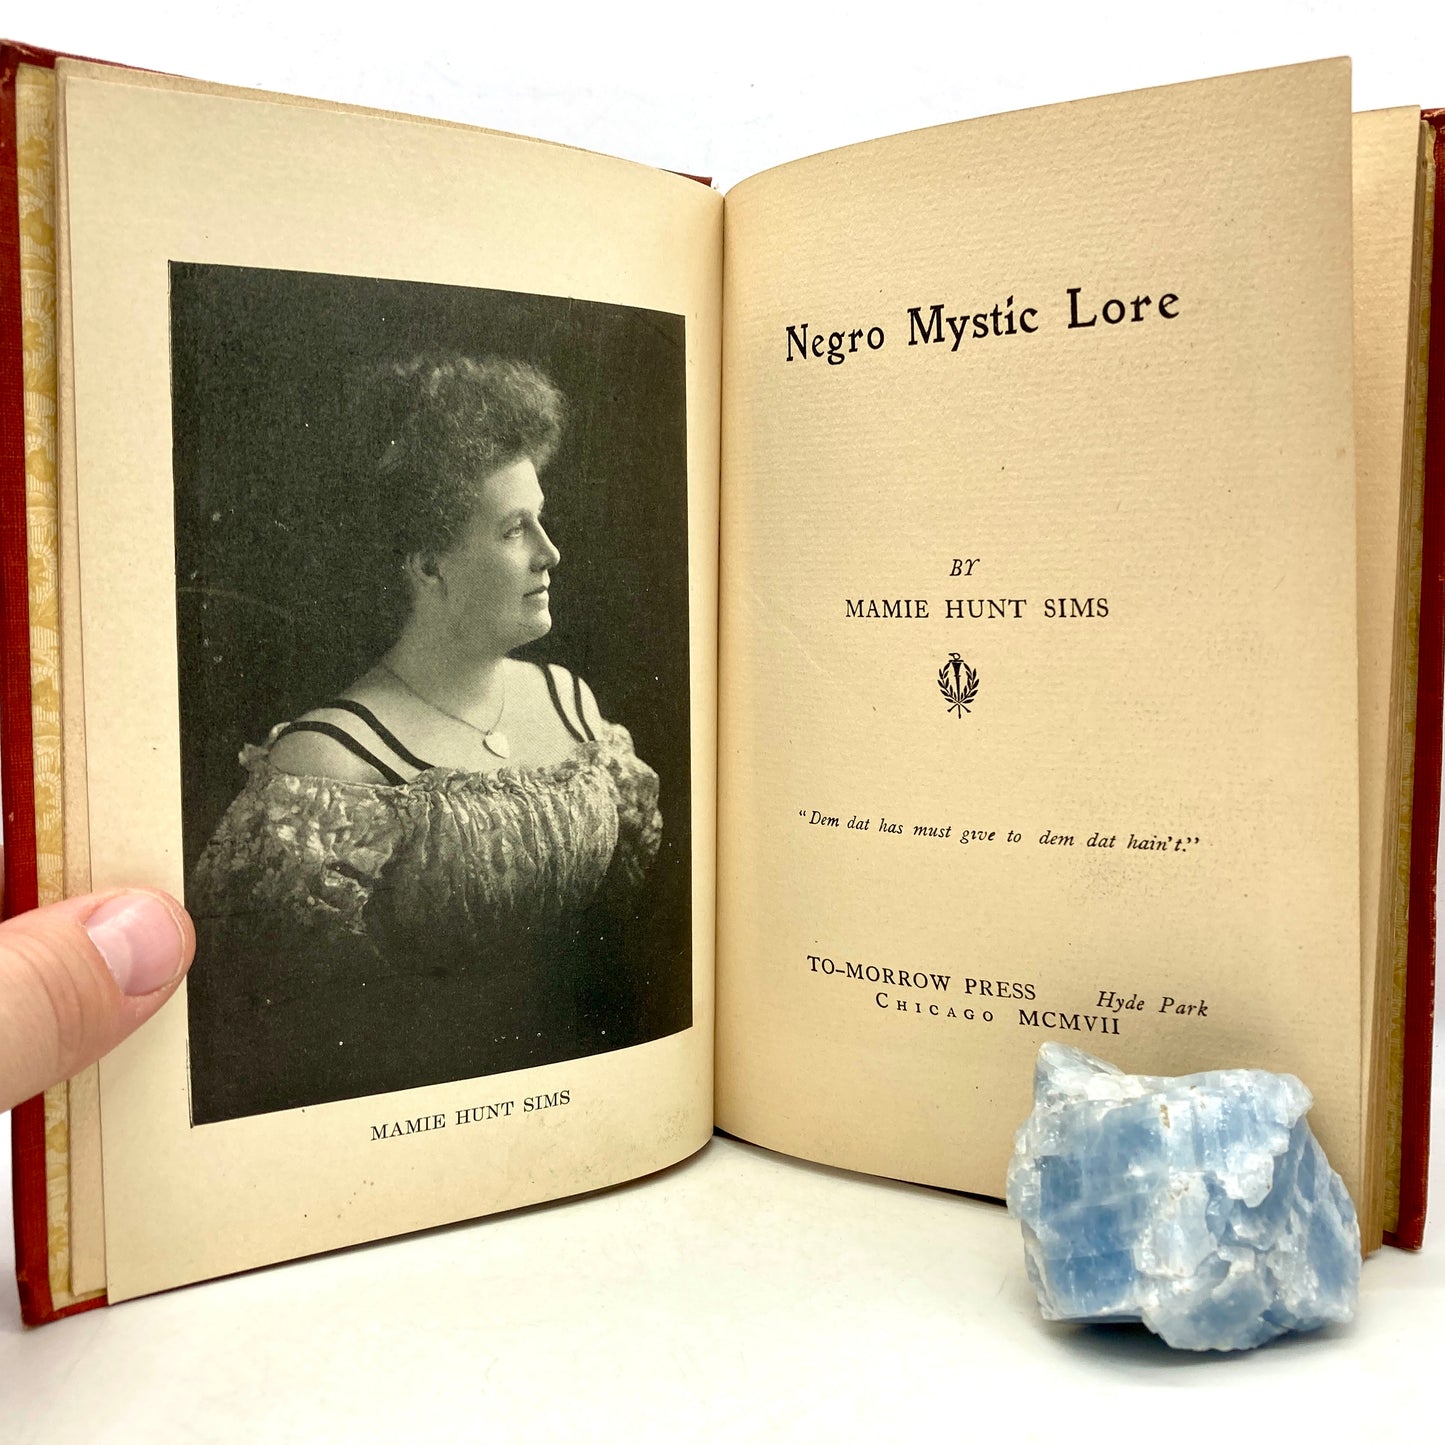 SIMS, Mamie Hunt "Negro Mystic Lore" [To-Morrow Press, 1907] 1st Edition - Buzz Bookstore